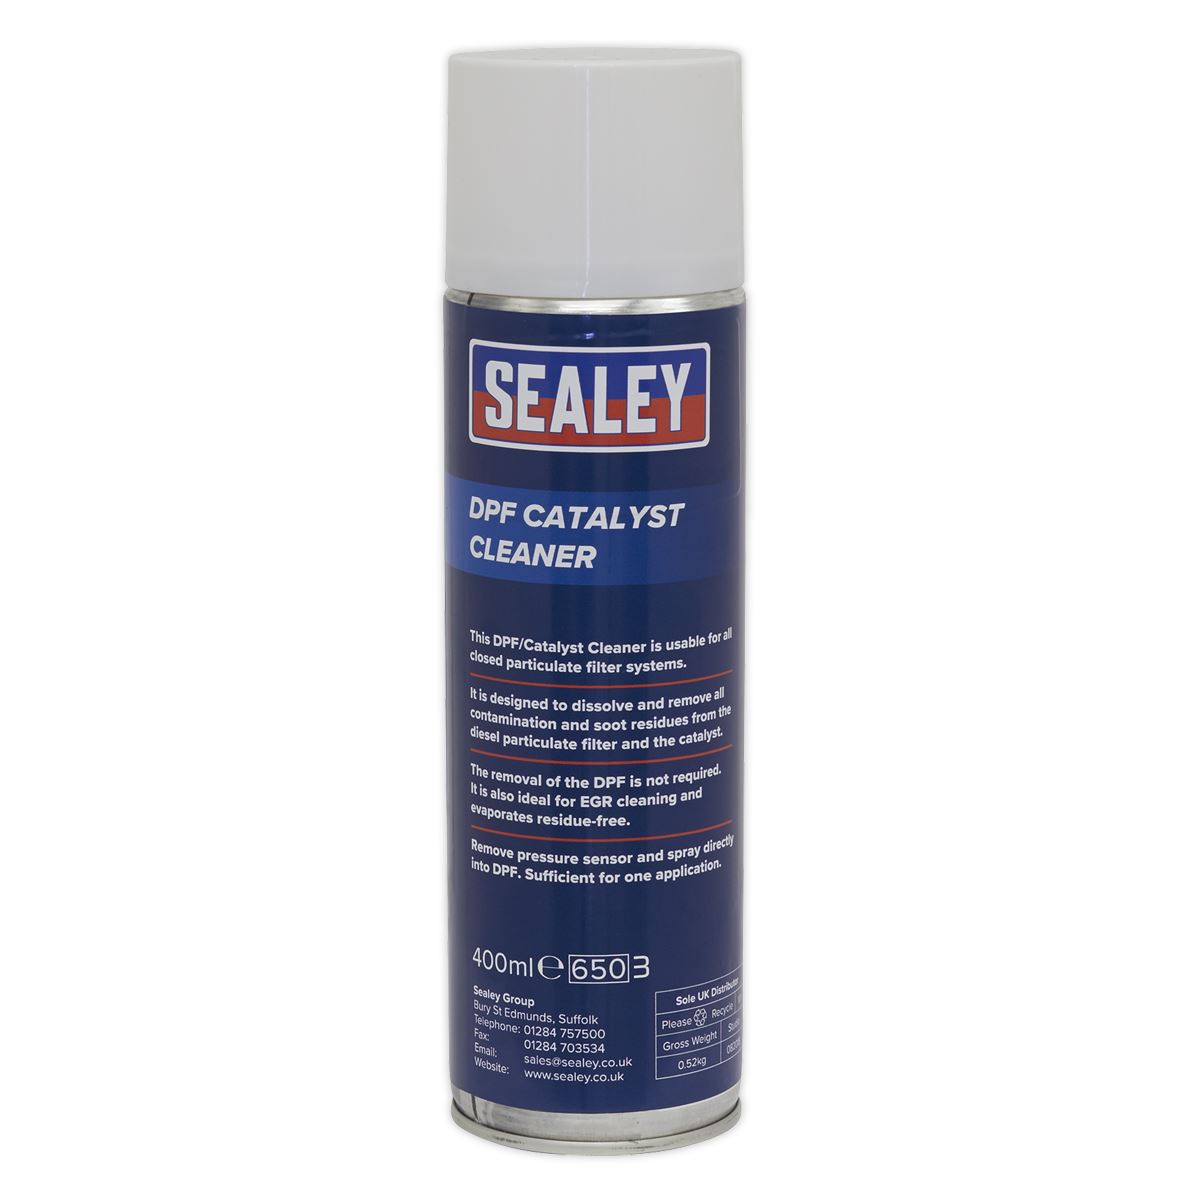 Sealey DPF Catalyst Cleaner